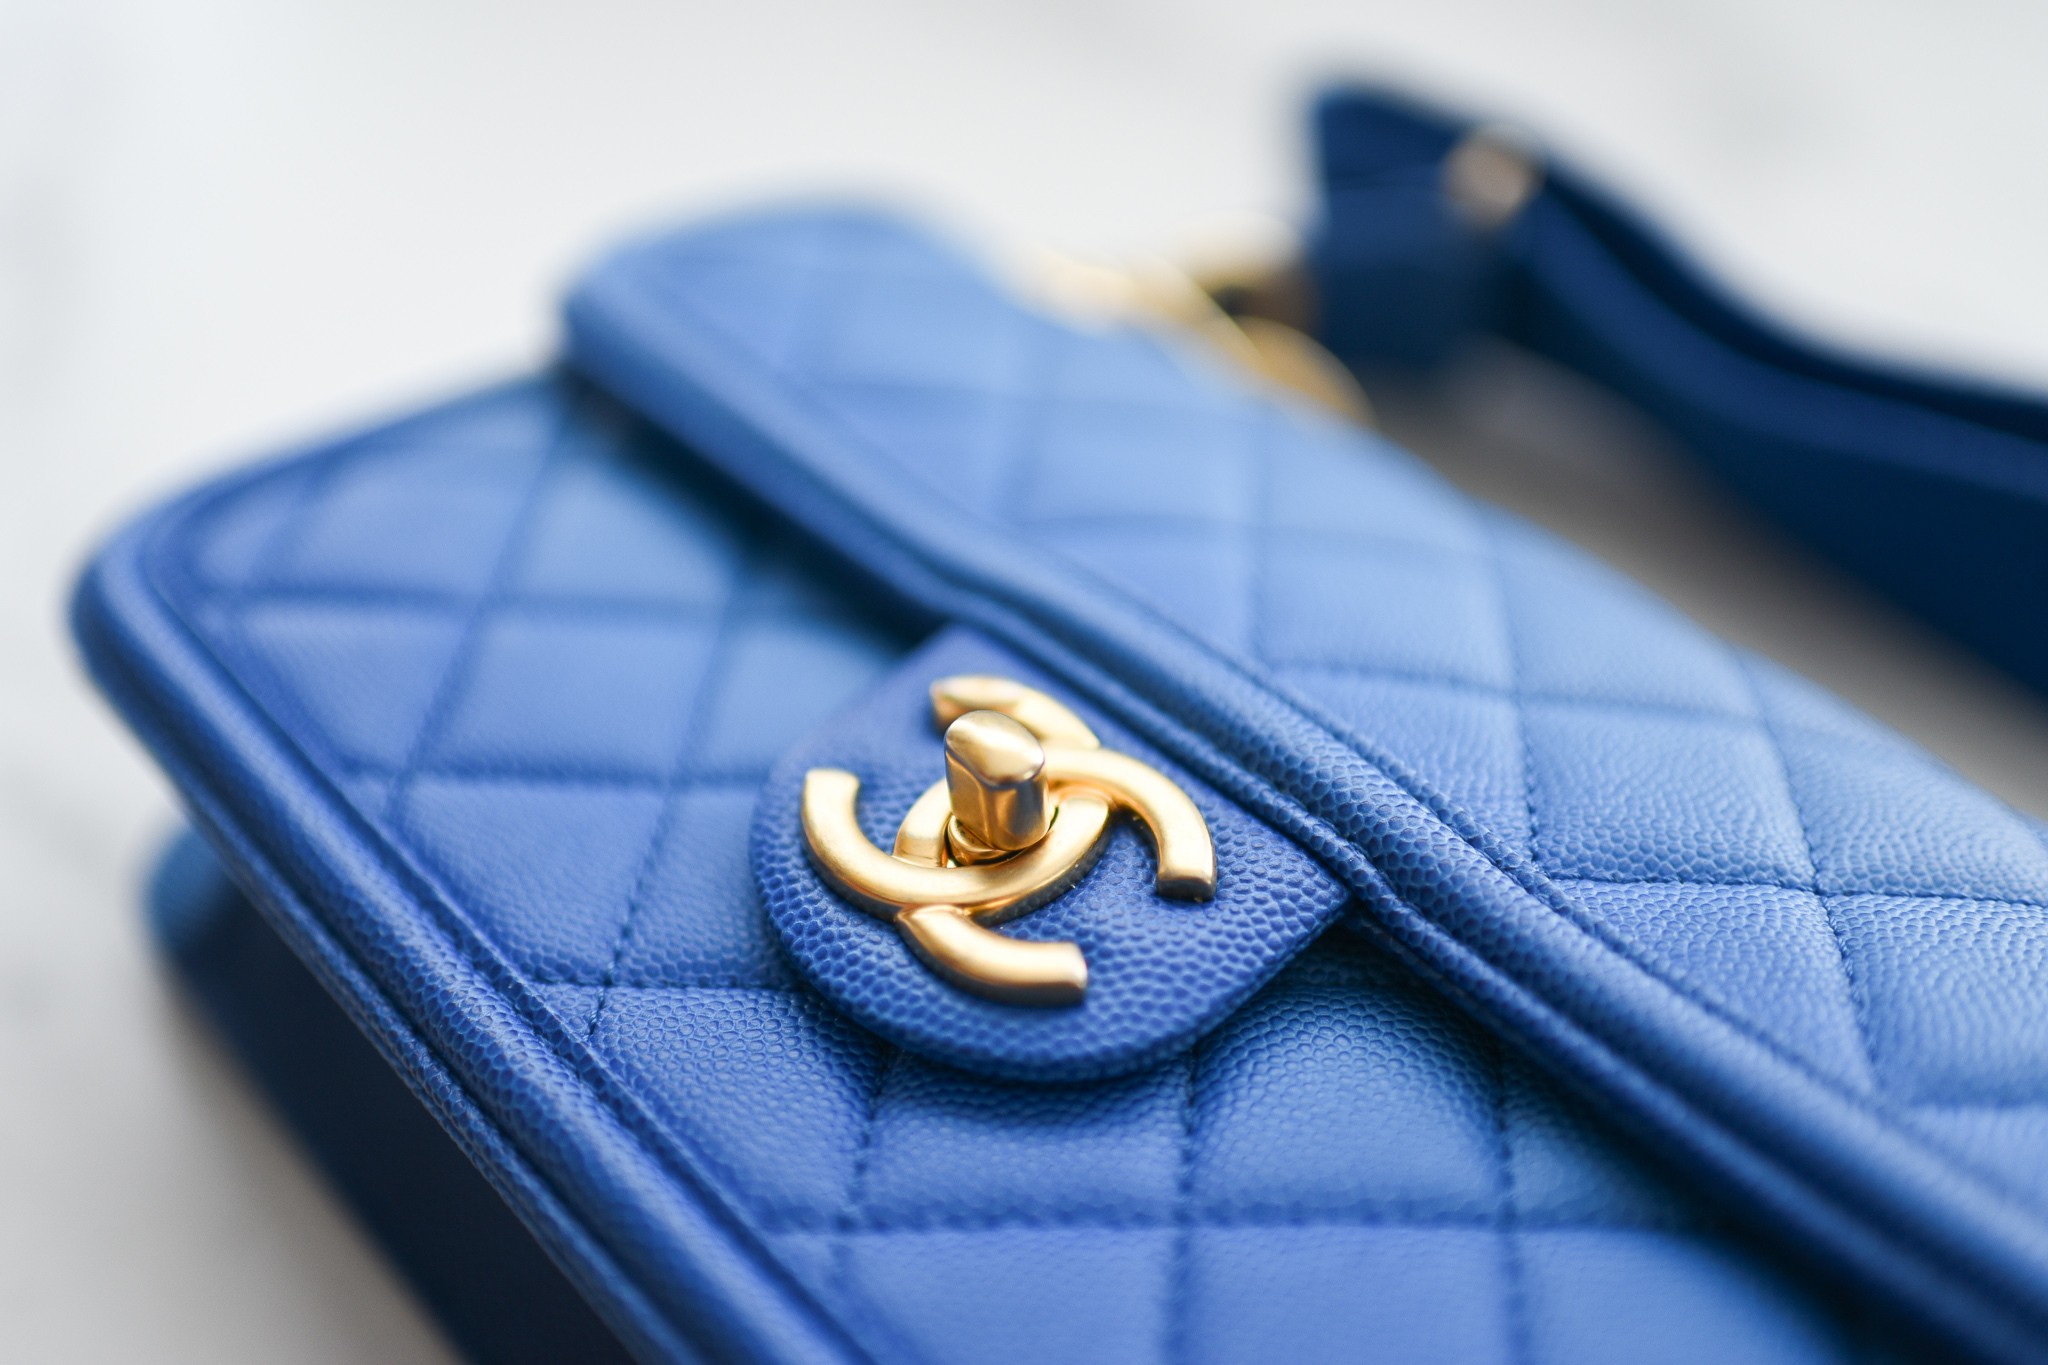 Chanel Sunset by the Sea in Blue Ombre Small Caviar Gold Hardware